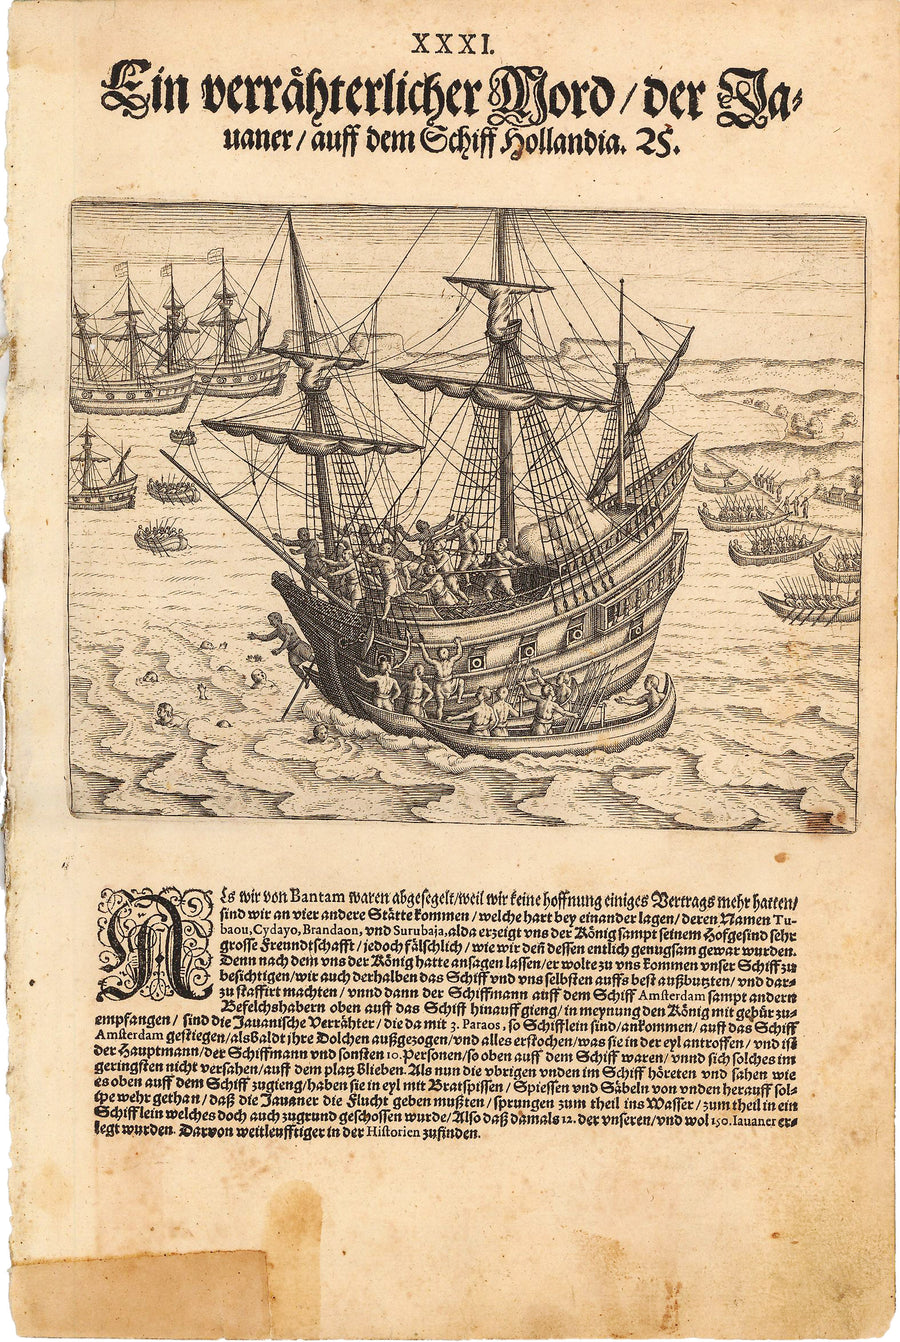 Antique Print Showing Attack on Dutch Ship by Javanese, by de Bry 1599